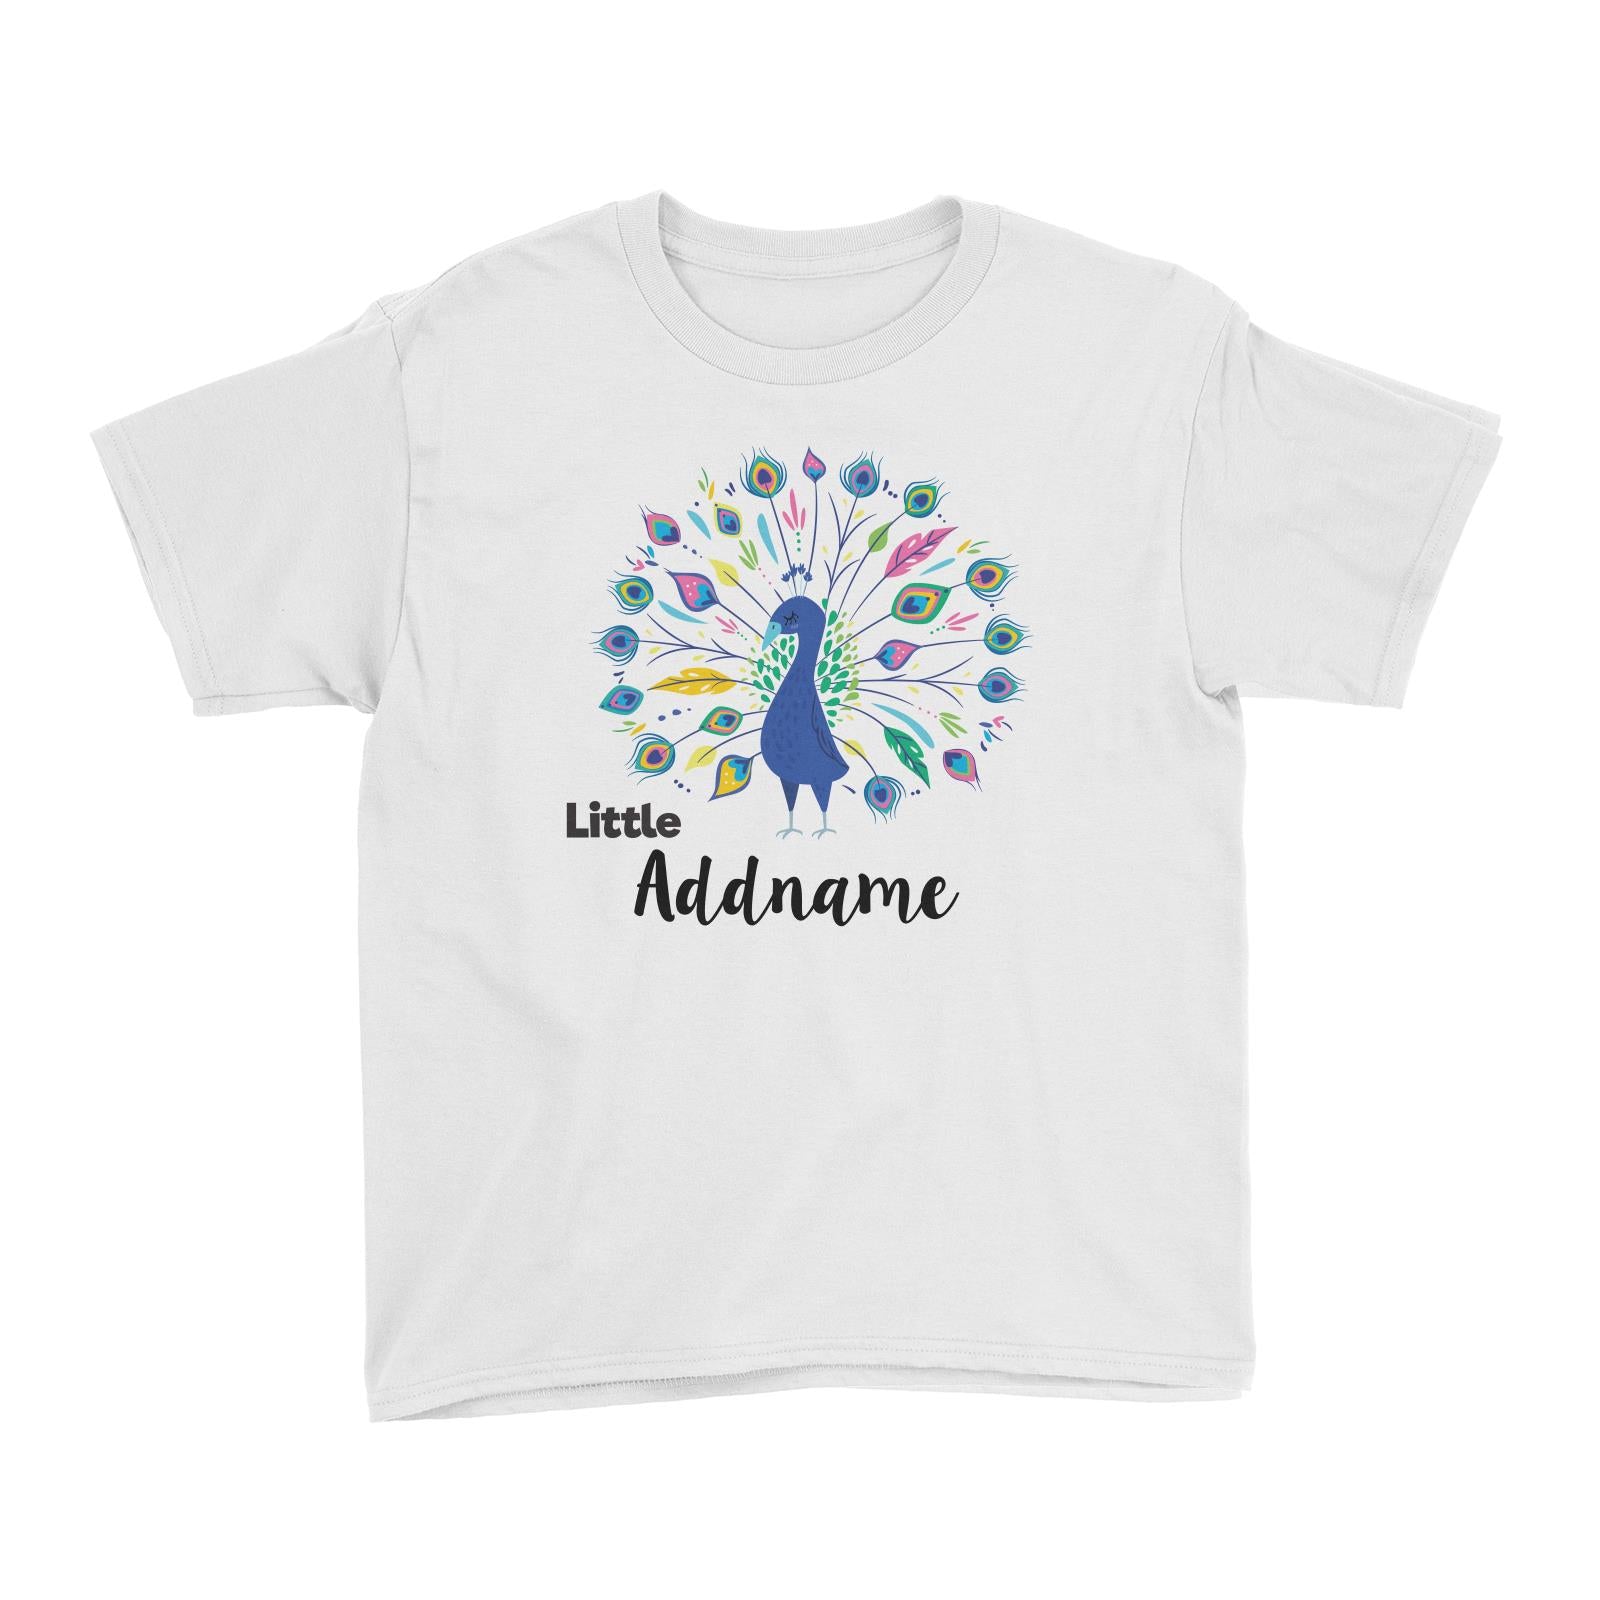 Deepavali Colourful Sweet Little Peacock Addname Kid's T-Shirt